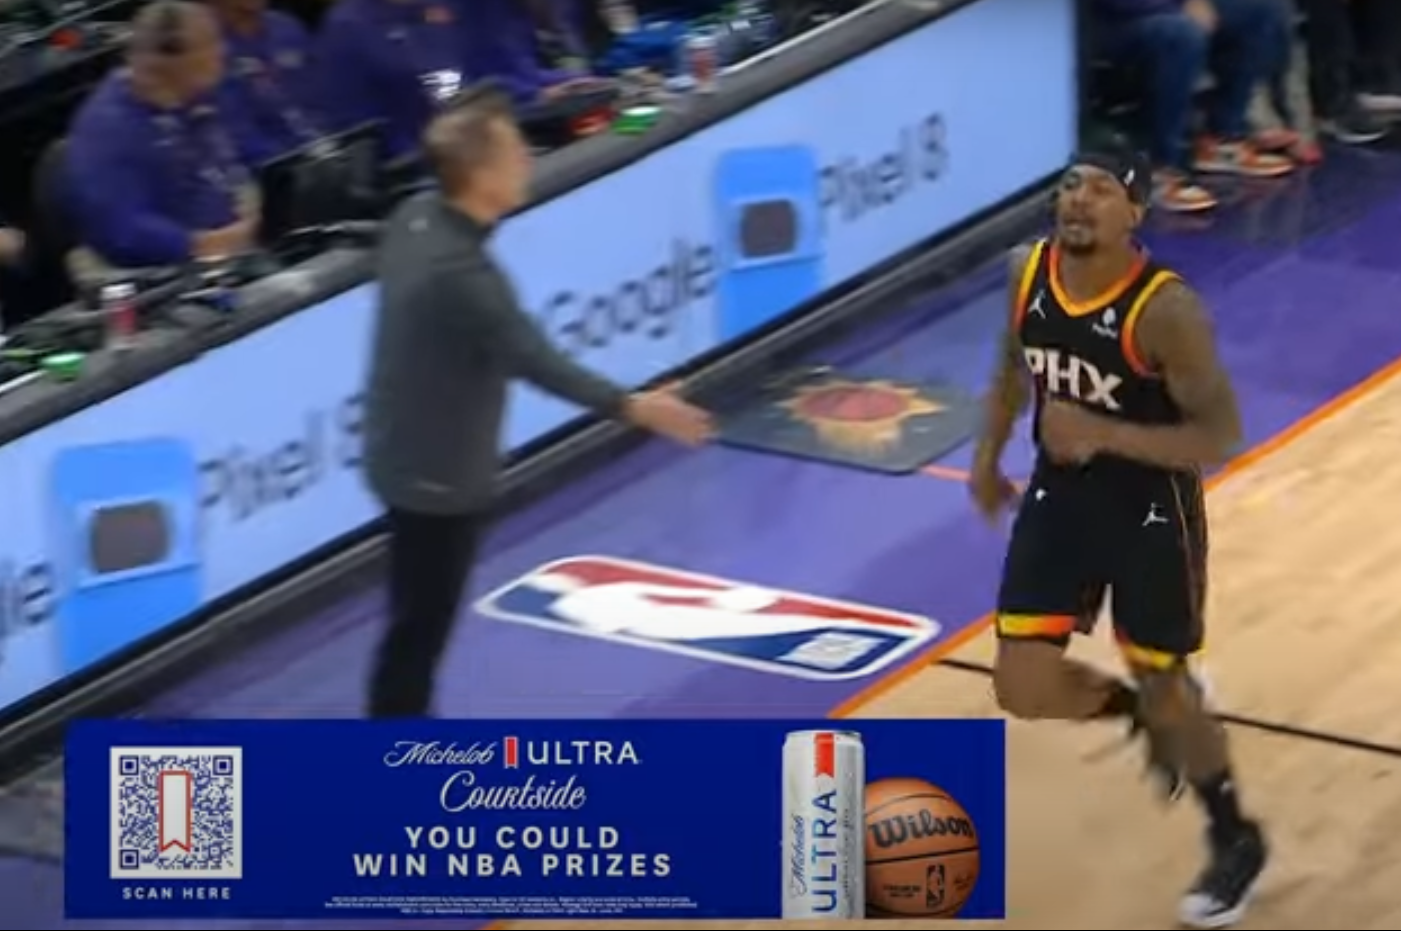 bradley beal appeared to ignore a handshake from suns coach frank vogel during season-ending loss